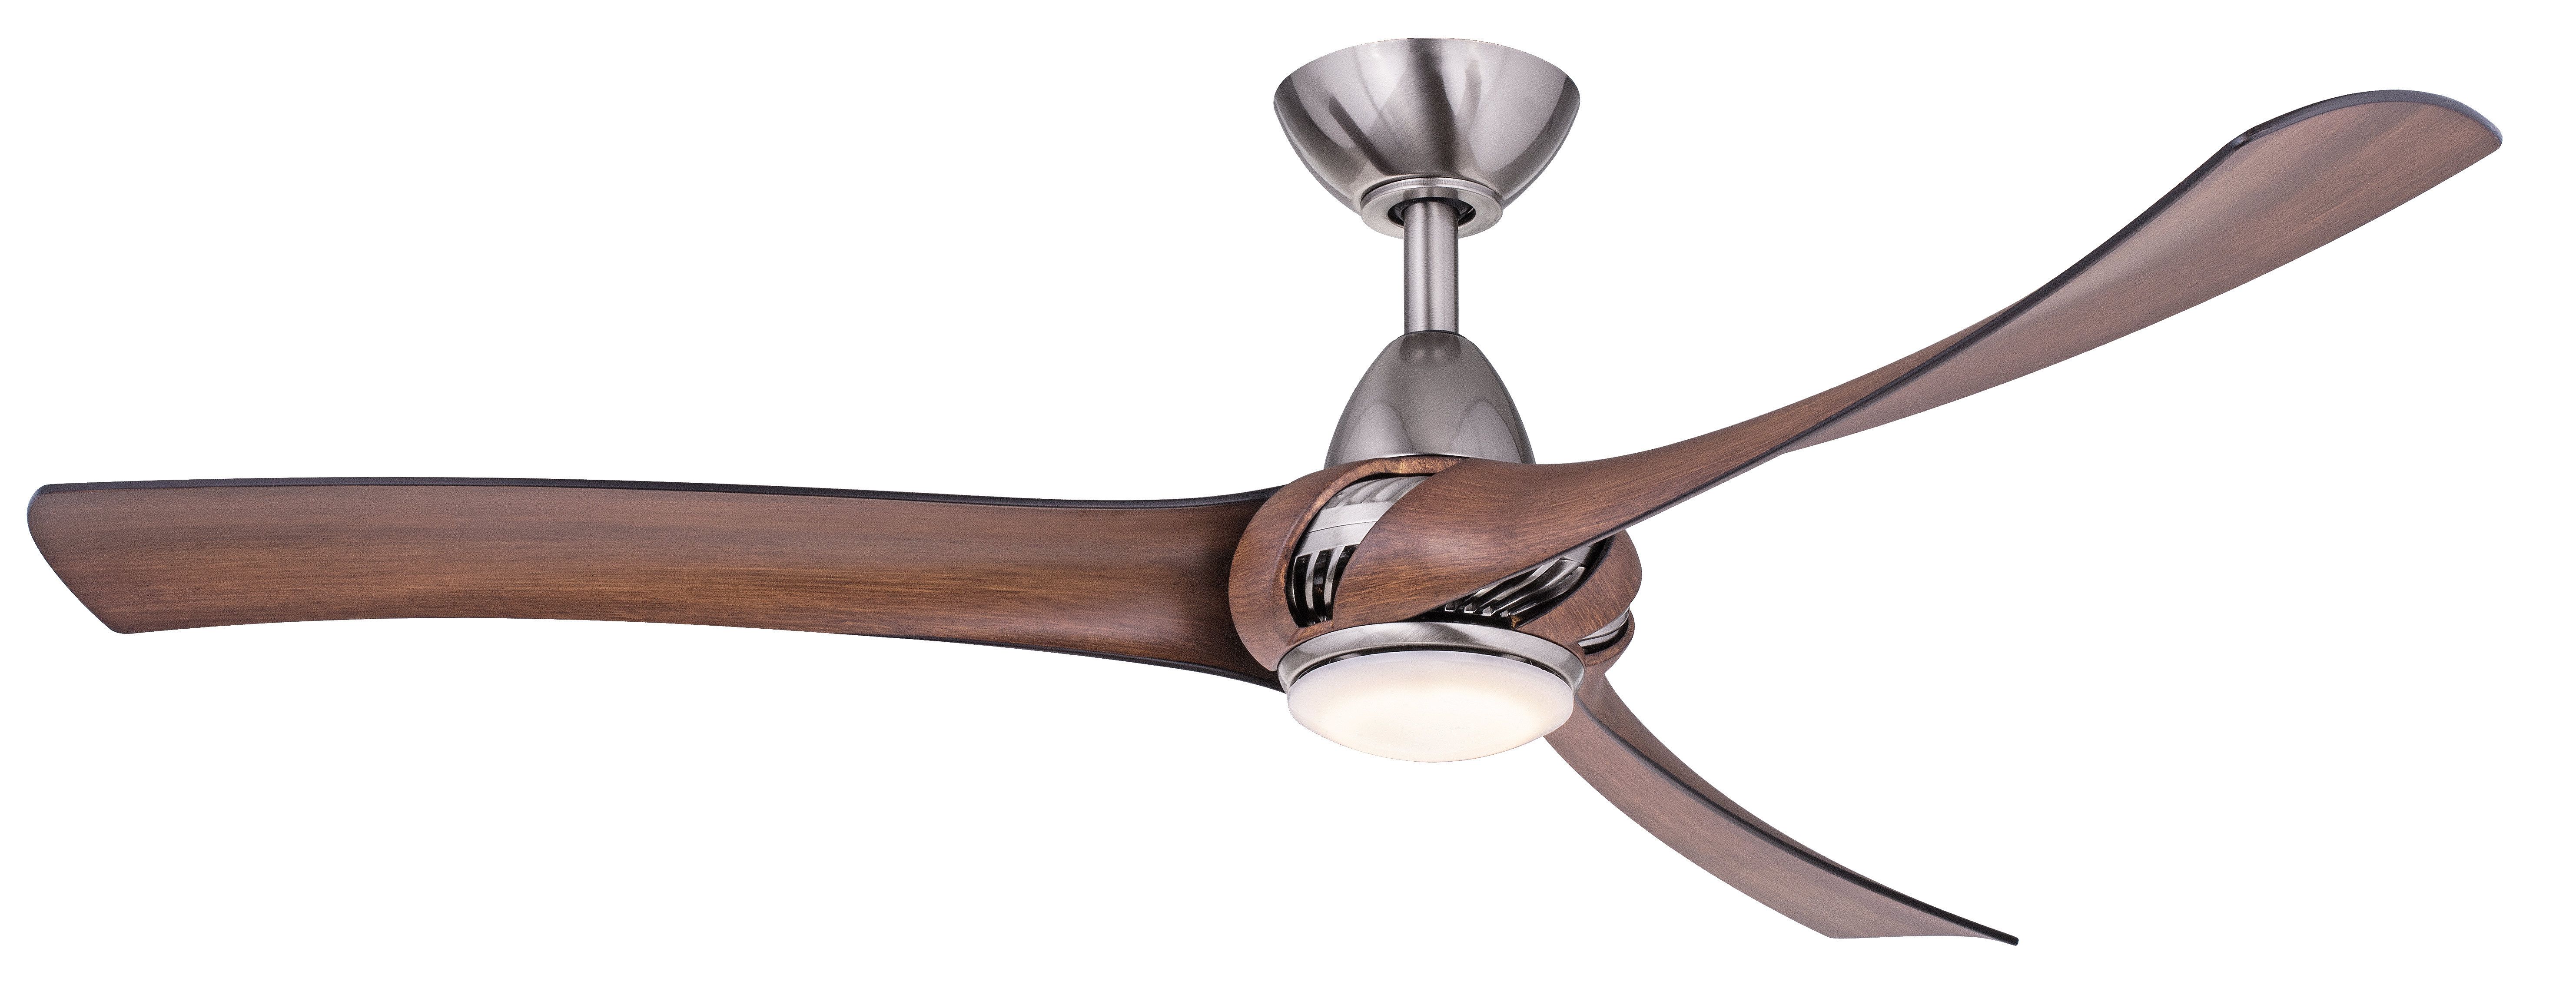 Most Up To Date 52'' Cairo 3 Blade Led Ceiling Fan With Remote, Light Kit Included Pertaining To Troy 3 Blade Led Ceiling Fans (Photo 2 of 20)